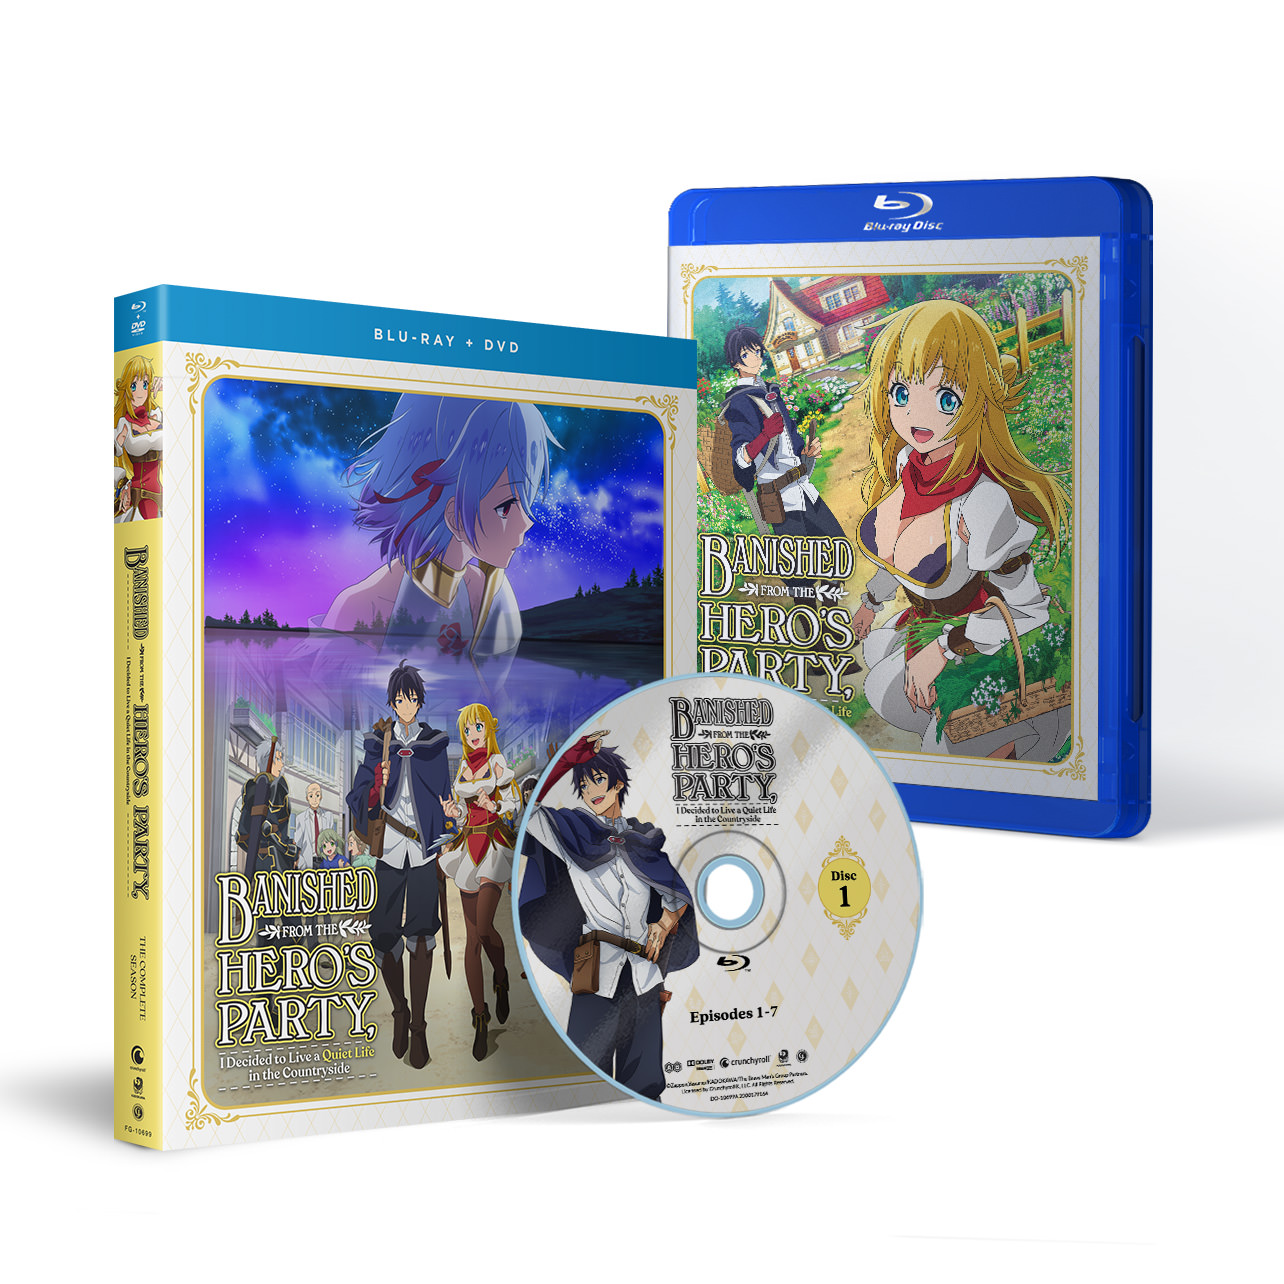 Banished from the Hero's Party I Decided to Live a Quiet Life in the Countryside - The Complete Series (Standard Edition) – Blu-ray + DVD. Photo Credit: Crunchyroll